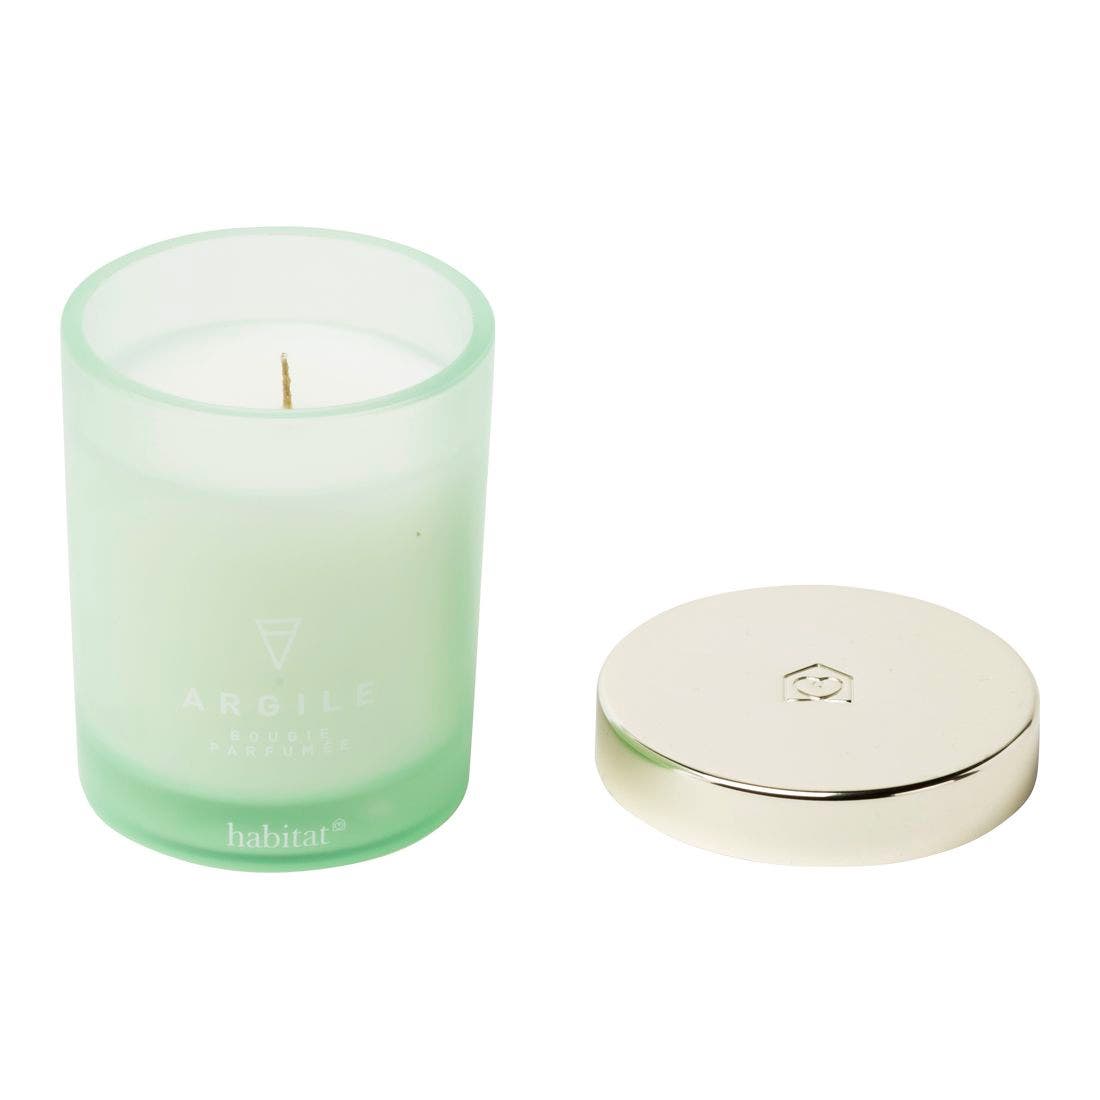 25026518-pure-cardinal-aromatherapy-spa-candle-candle-acessories-01